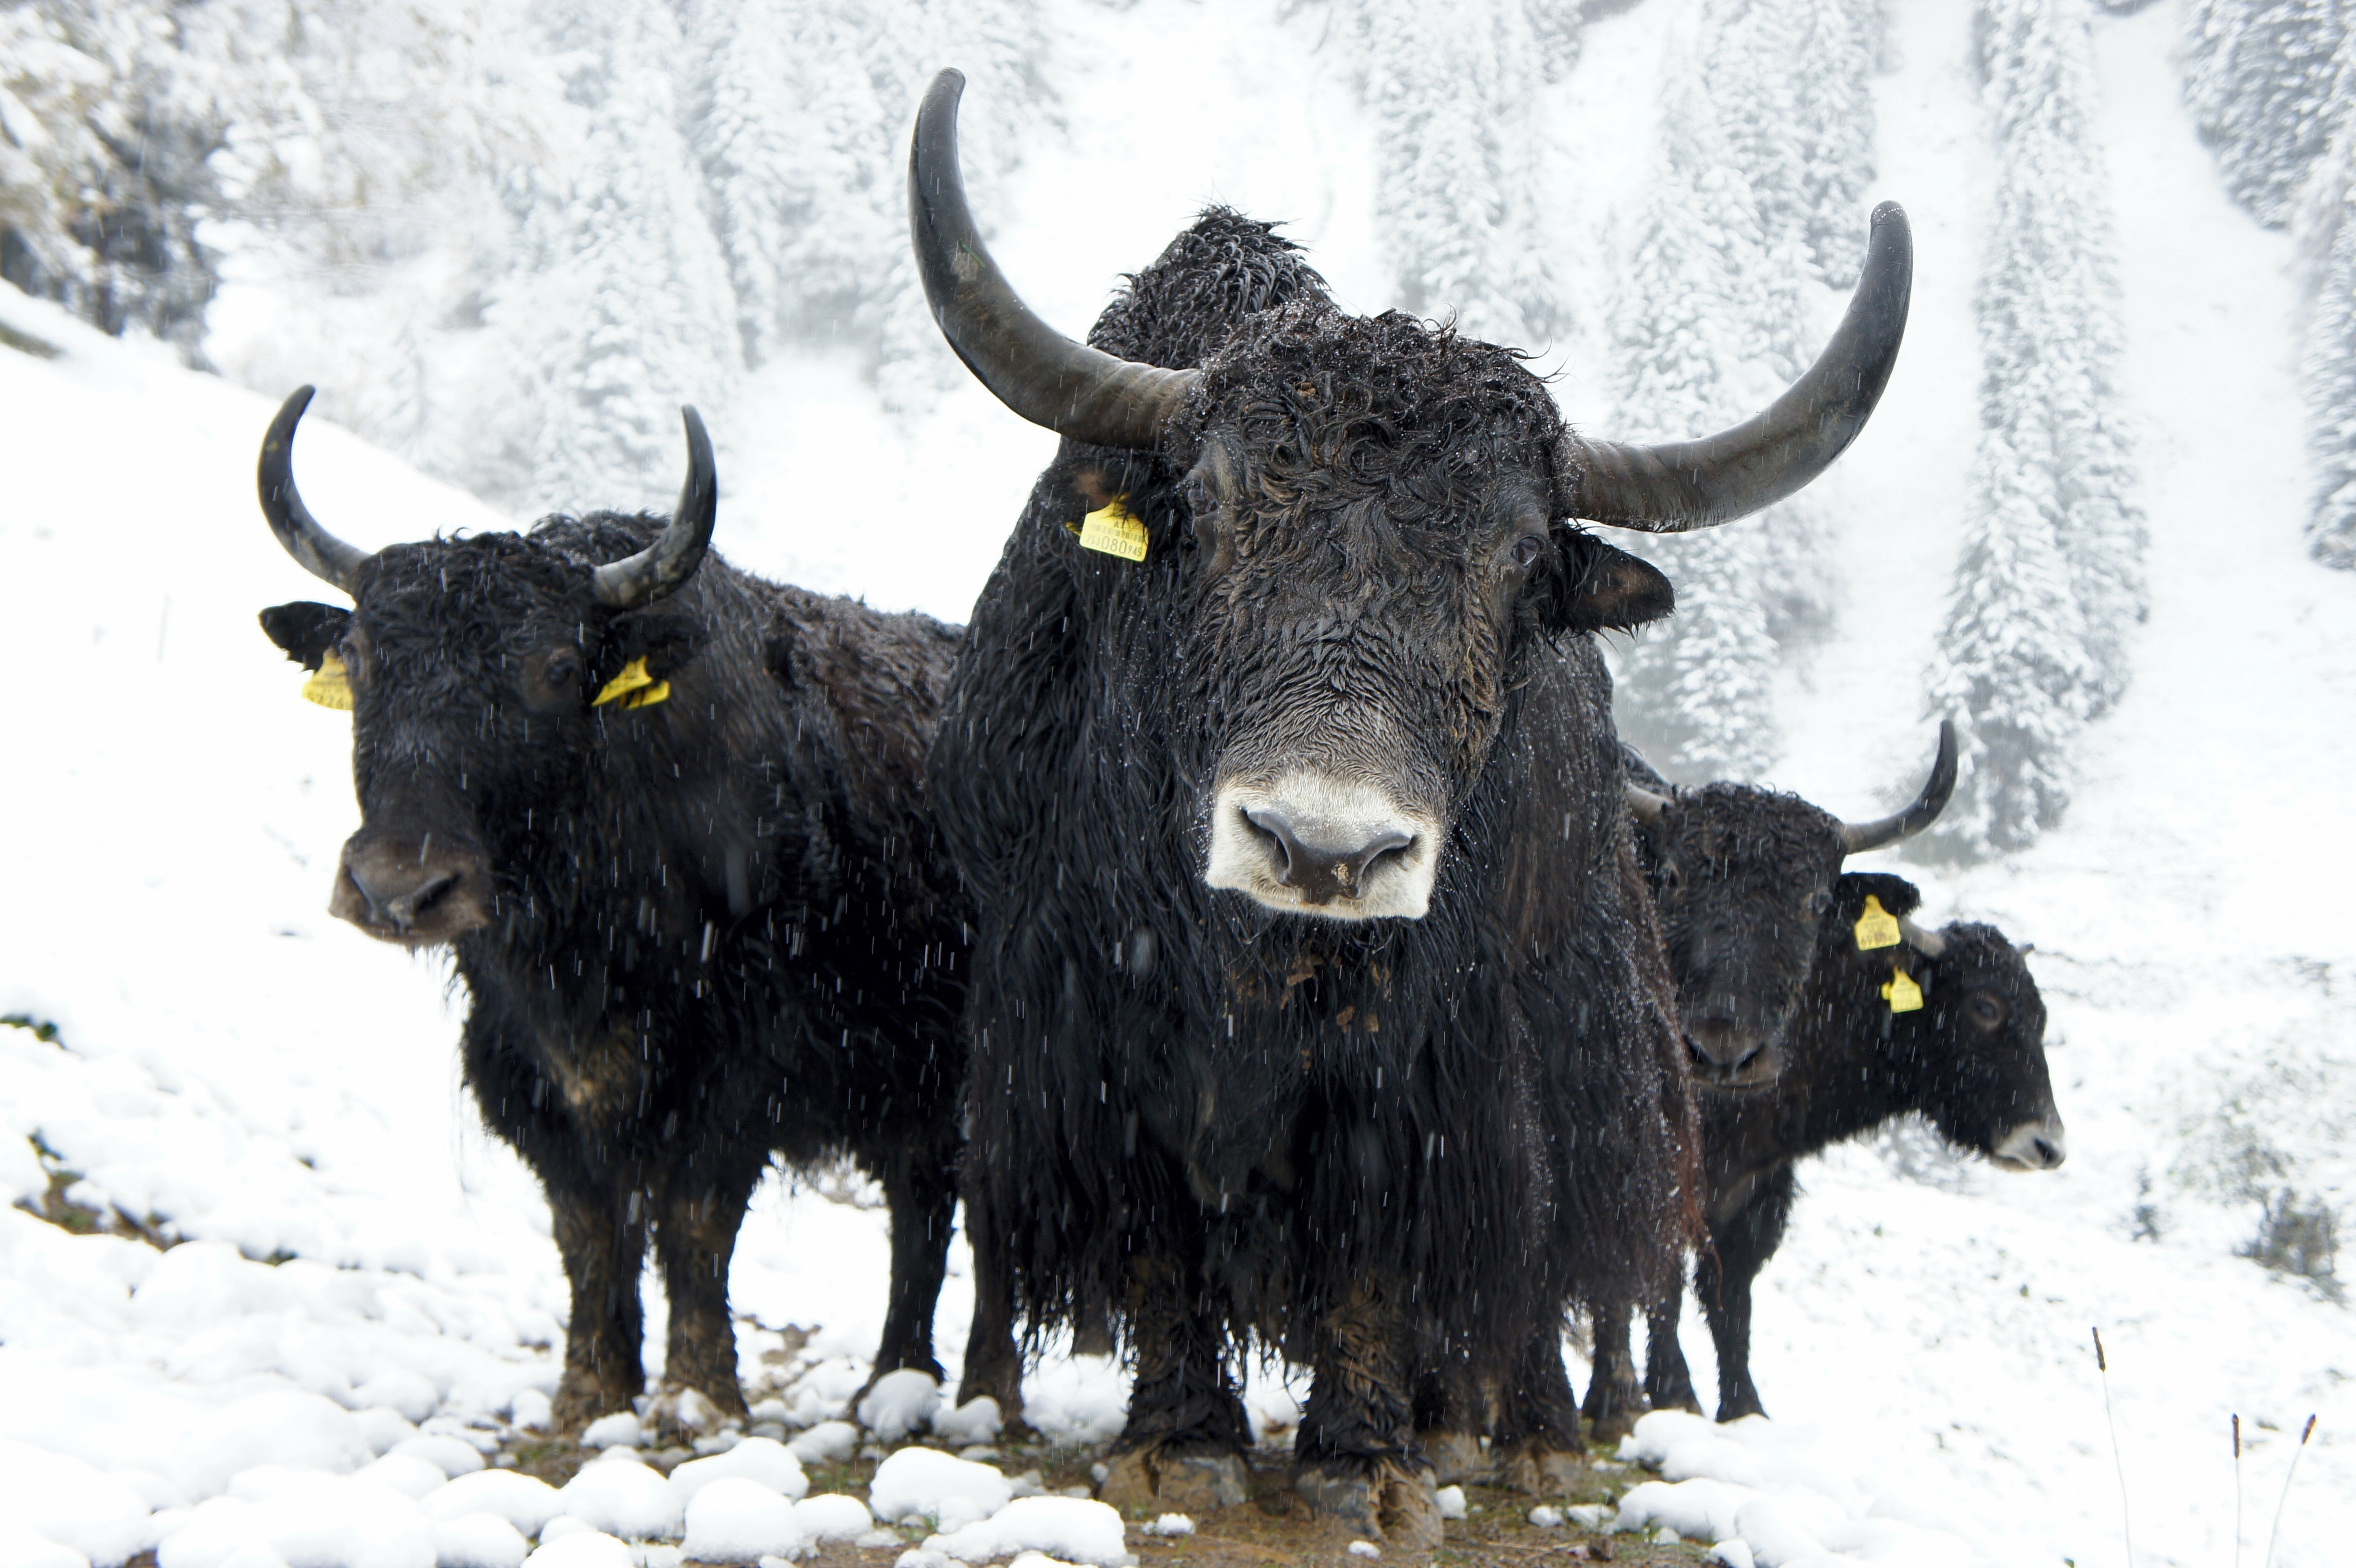 Four black yaks on a dirt path in a snow-covered mountain landscape. One yak is in the lead, staring into the camera; three yaks are behind.